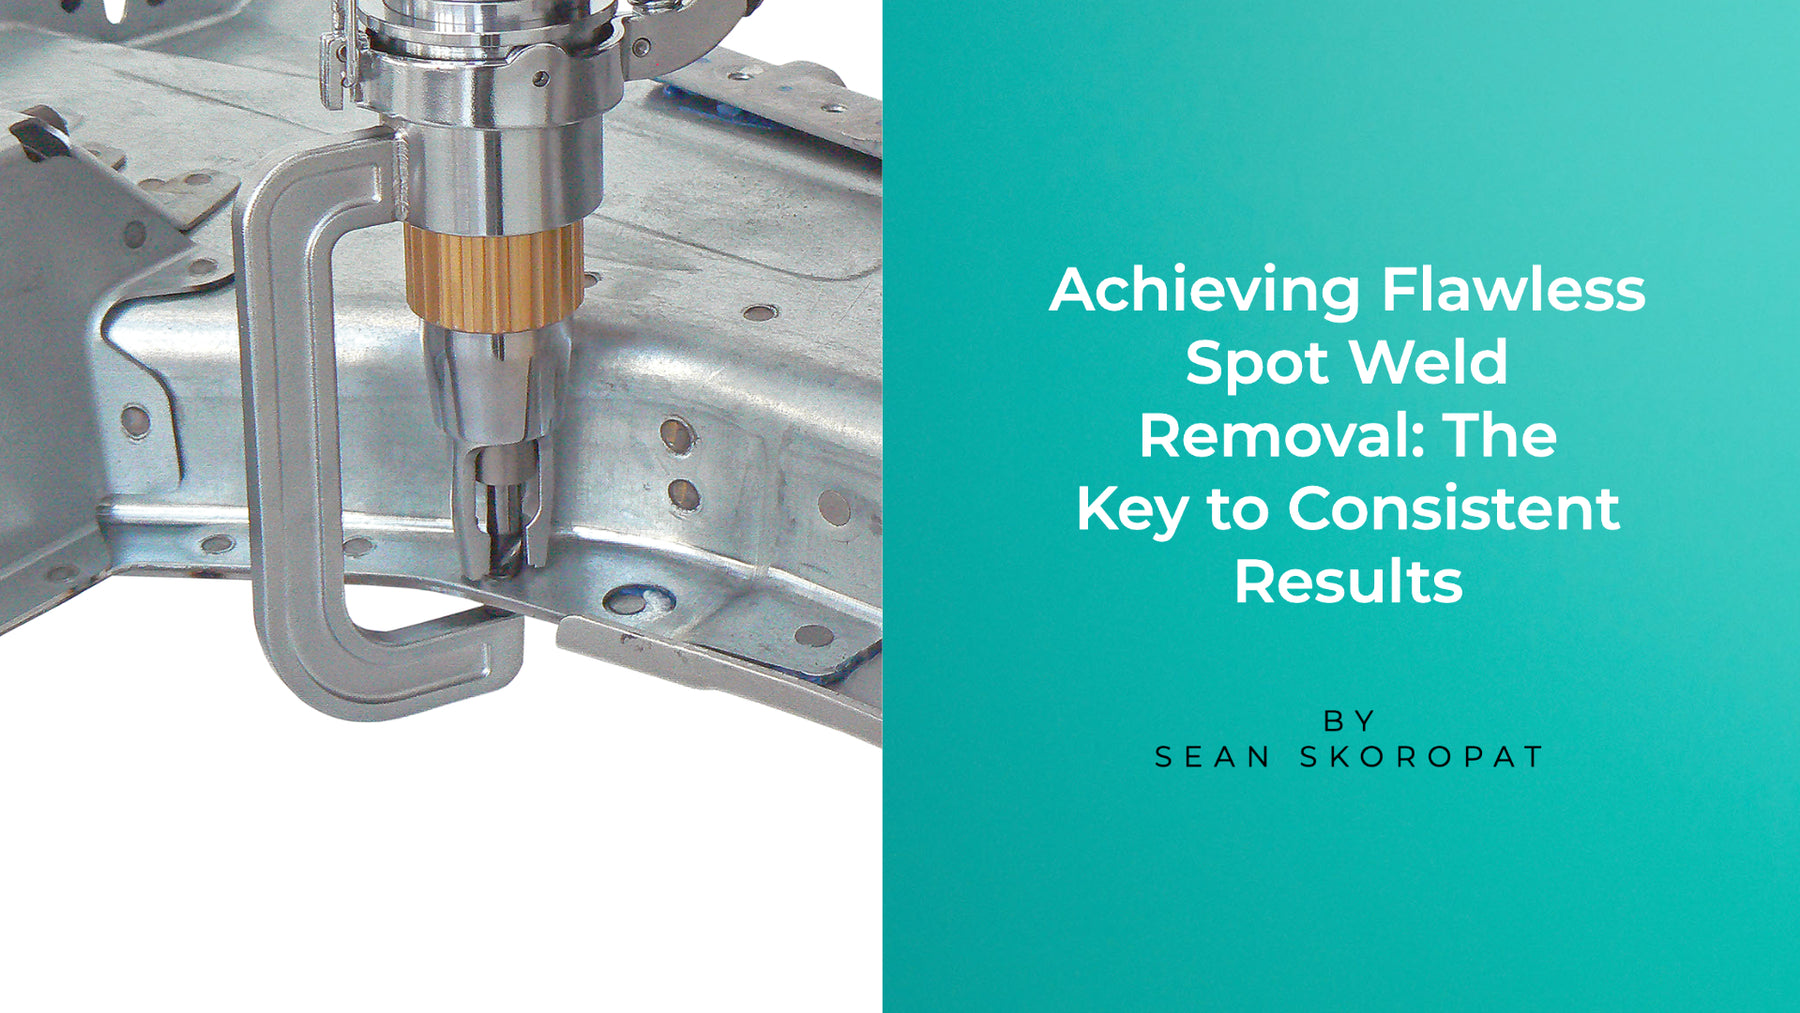 Achieving Flawless Spot Weld Removal: The Key to Consistent Results | Titanium Tools & Equipment Inc.